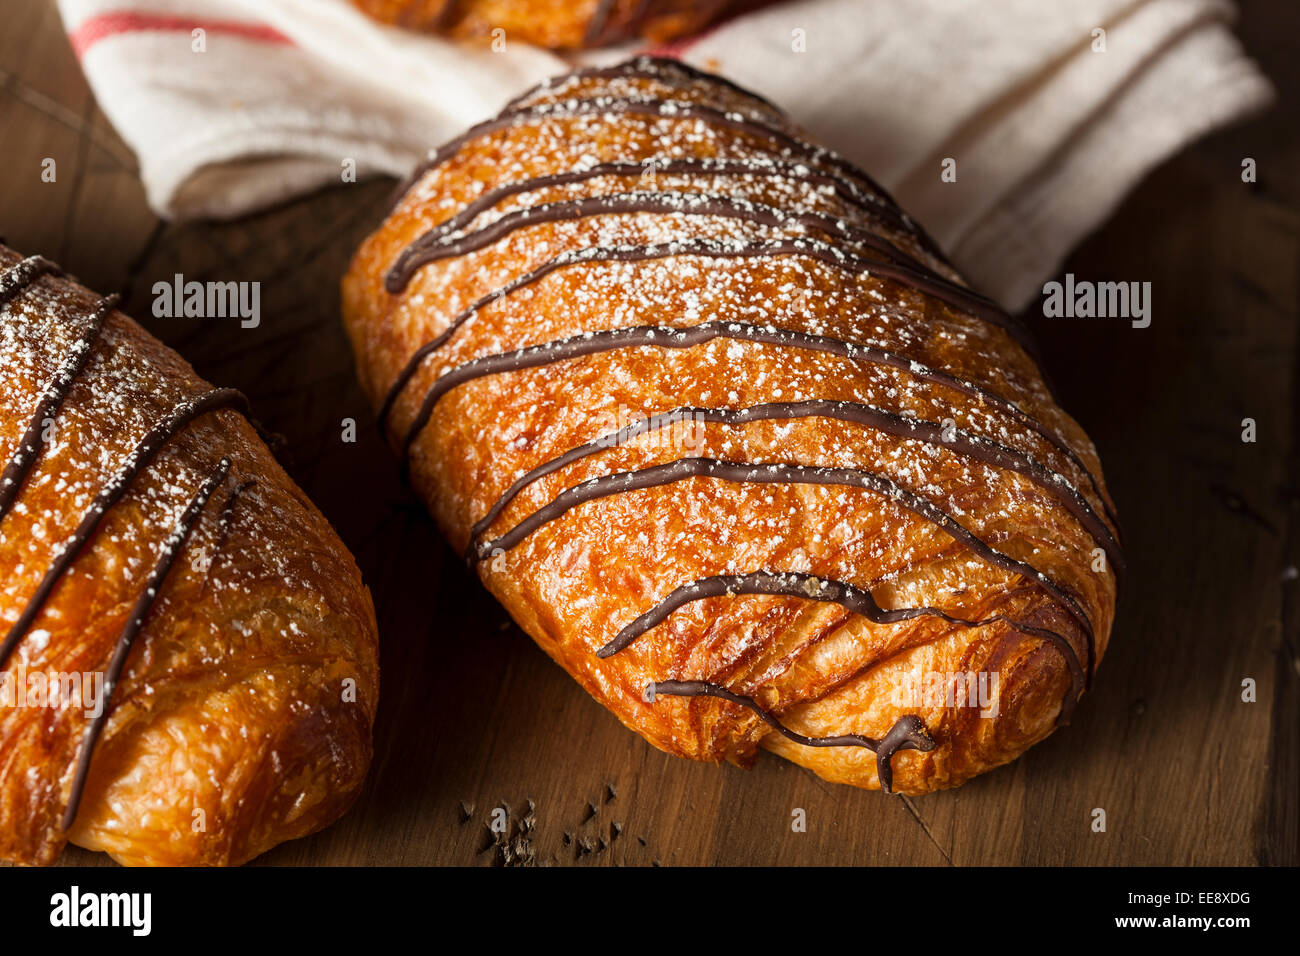 Homemade Chocolate Croissant Pastry with Powdered Sugar Stock Photo